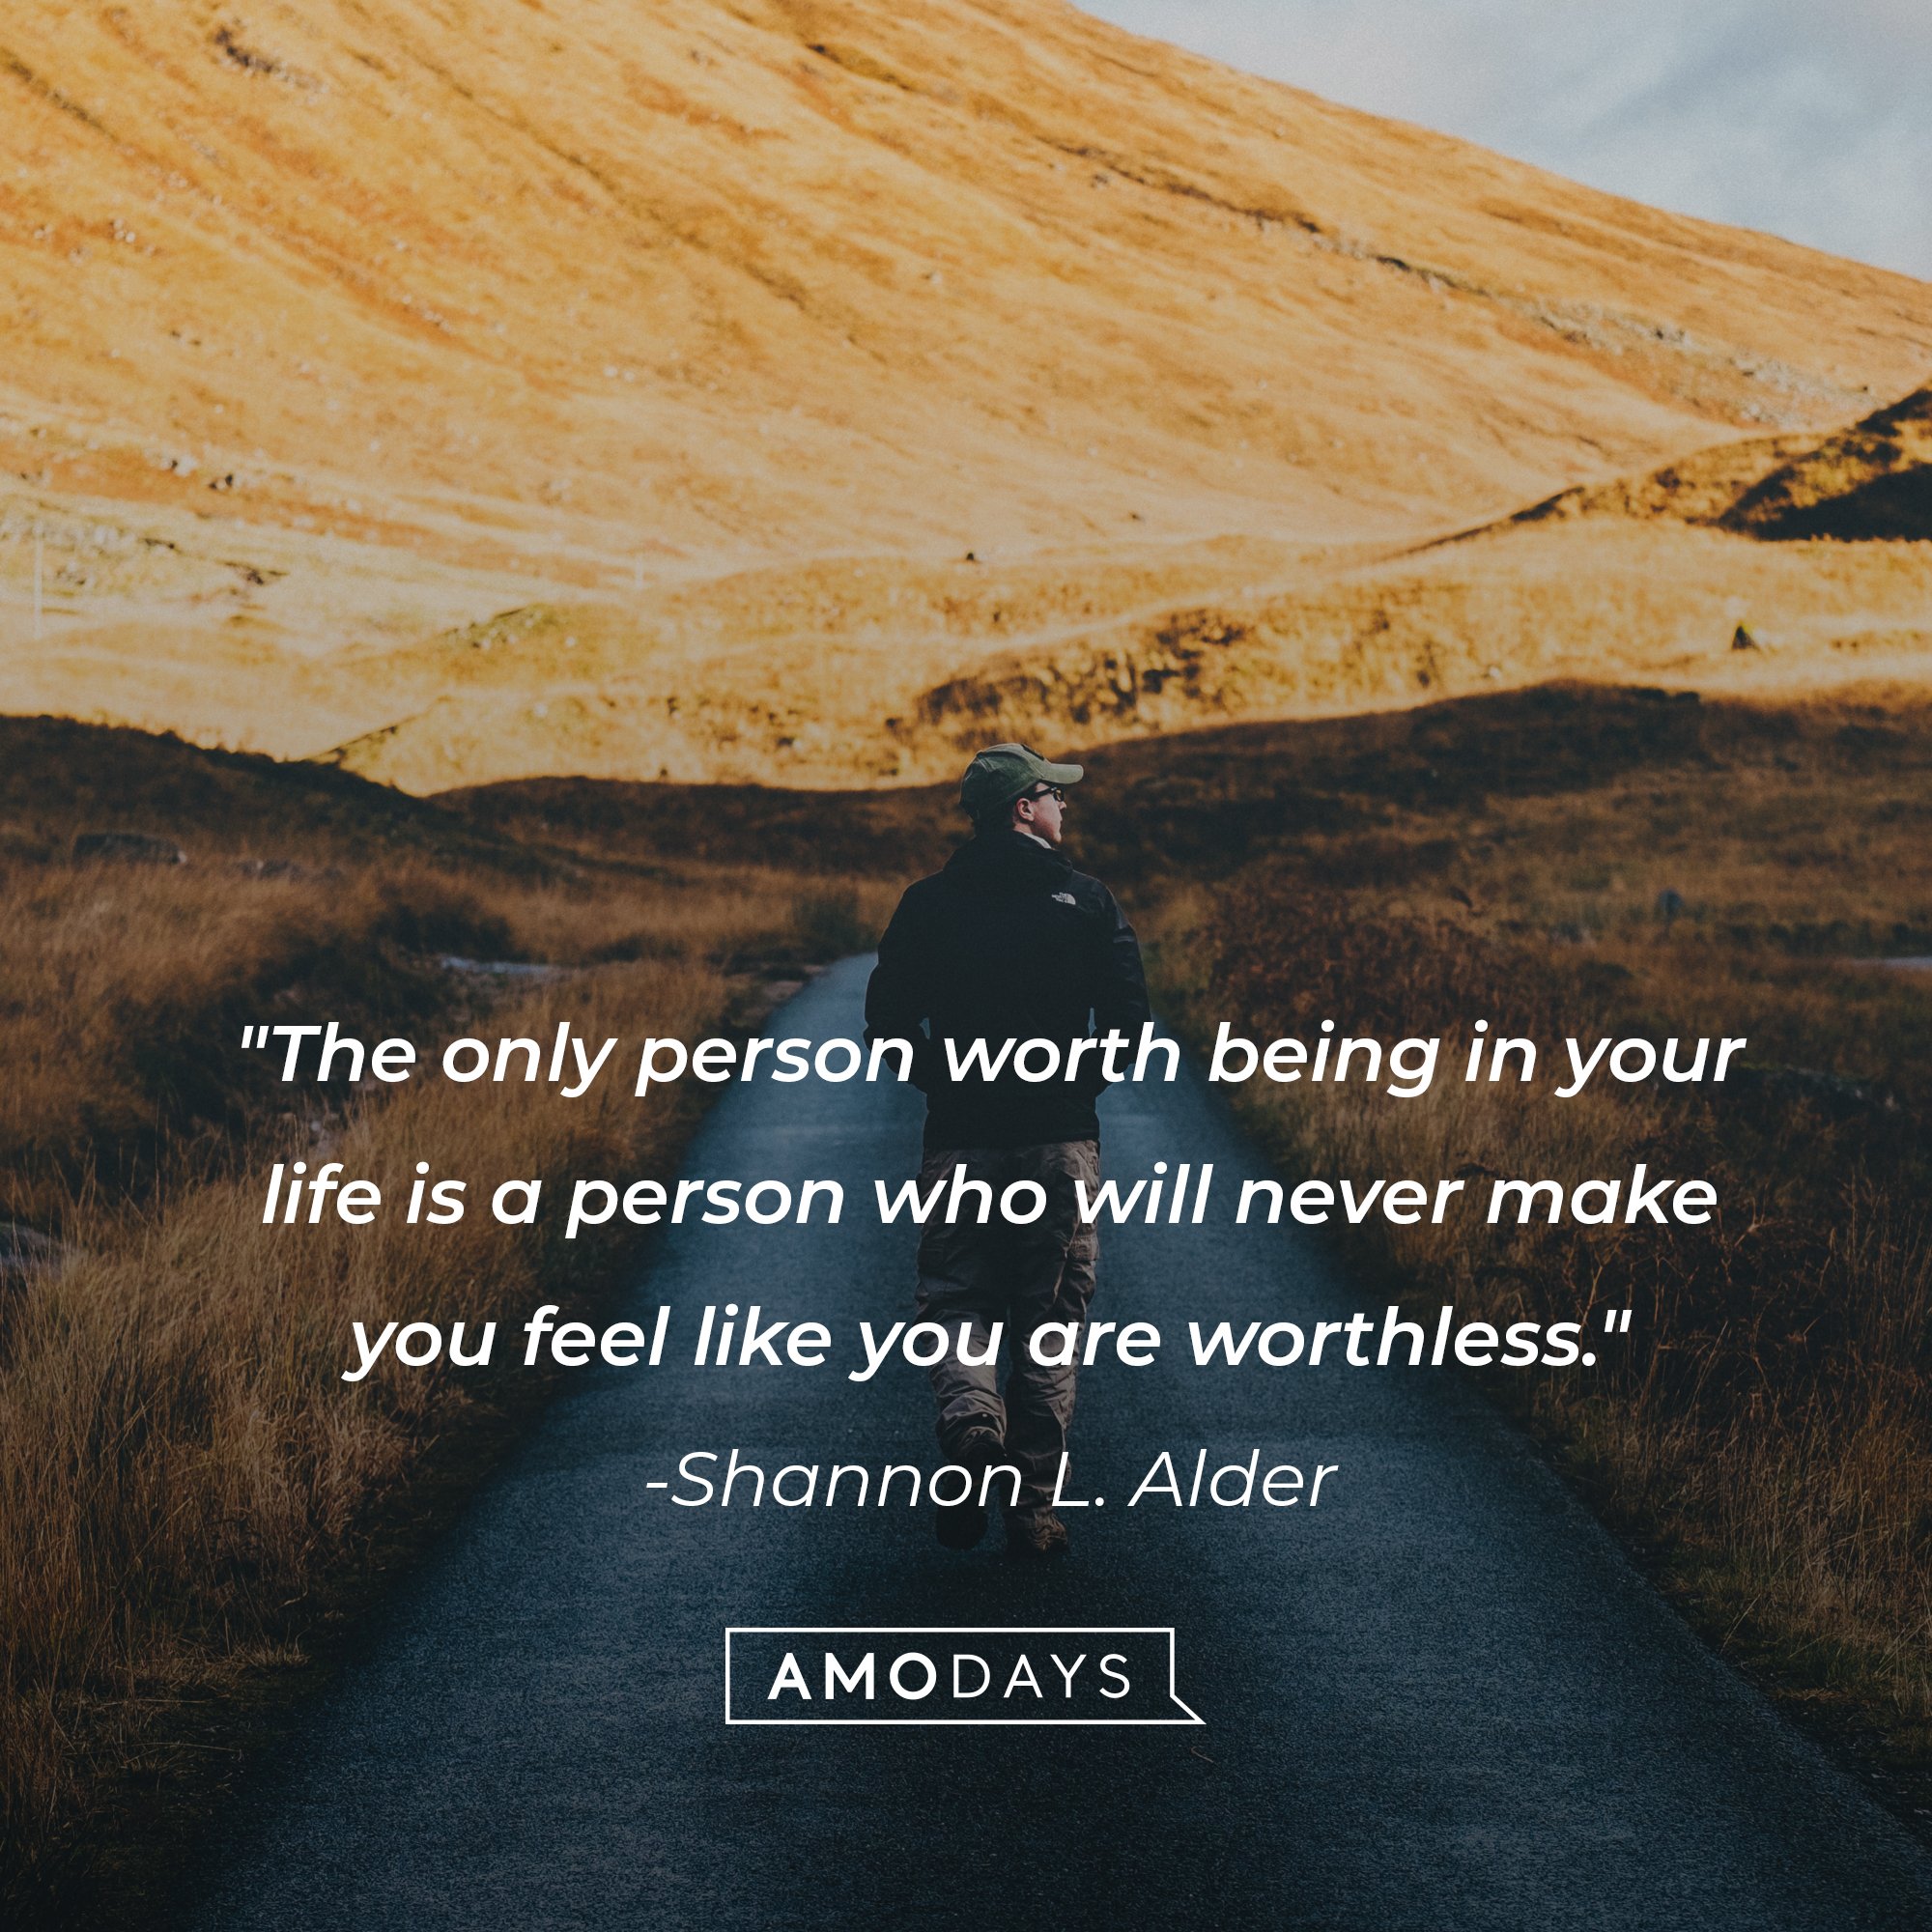 Shannon L. Alder's quote: "The only person worth being in your life is a person who will never make you feel like you are worthless." | Image: AmoDays